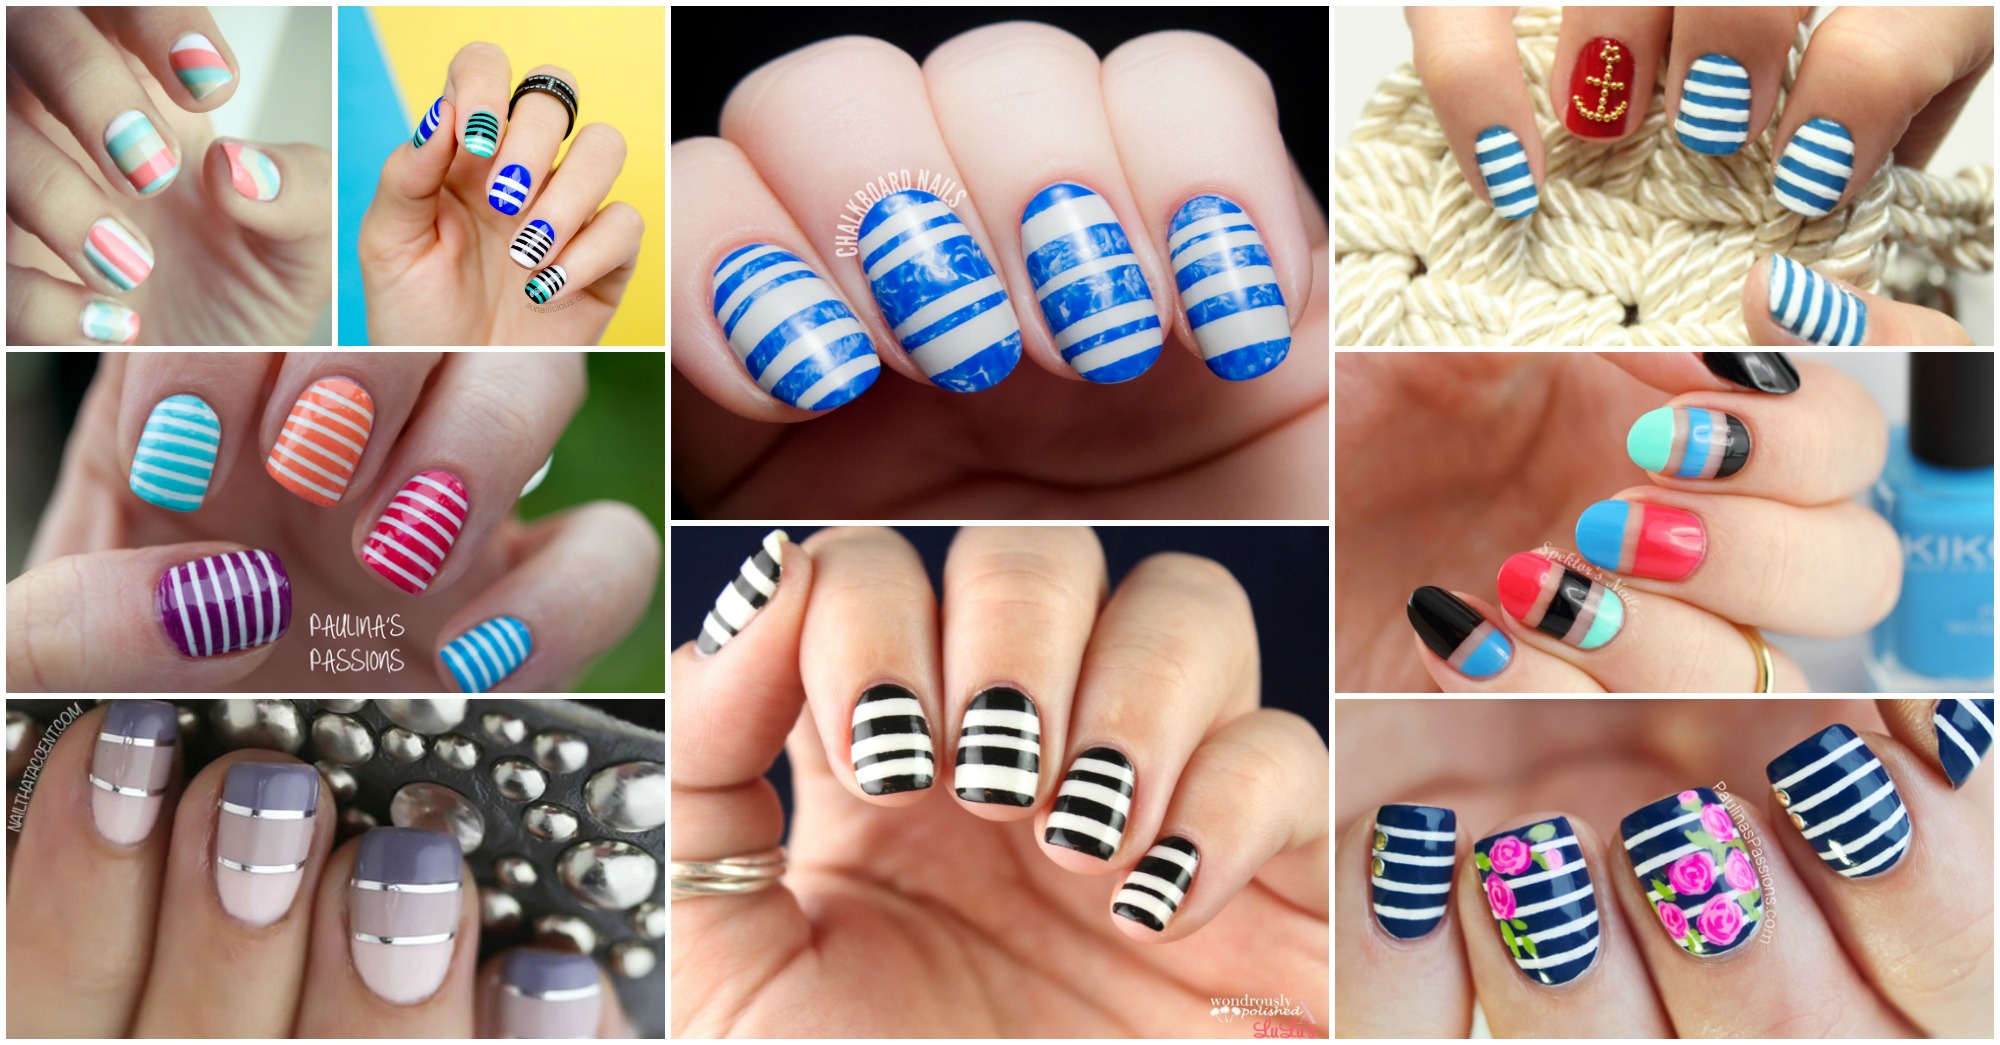 3. "Colorful Striped Nail Designs for Summer" - wide 4